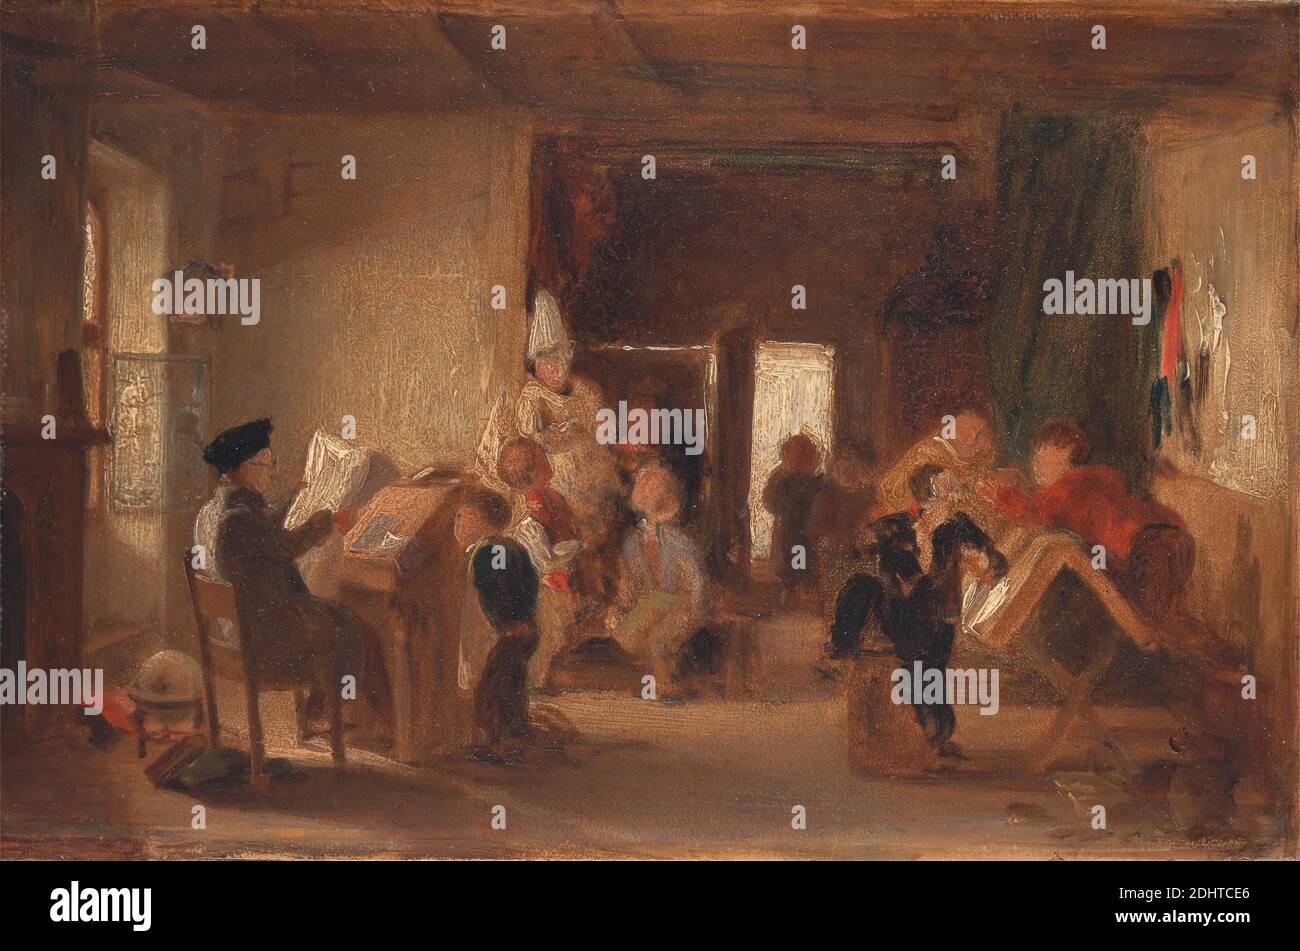 A Study of 'The Schoolroom', Attributed to Thomas Webster, 1800–1886, British, ca. 1820, Oil on board, Support (PTG): 6 1/4 x 9 1/2 inches (15.9 x 24.1 cm), boys, chairs, children, classroom, desks, fireplace, girls, reading, school, schoolrooms, study (visual work), teacher, teaching Stock Photo